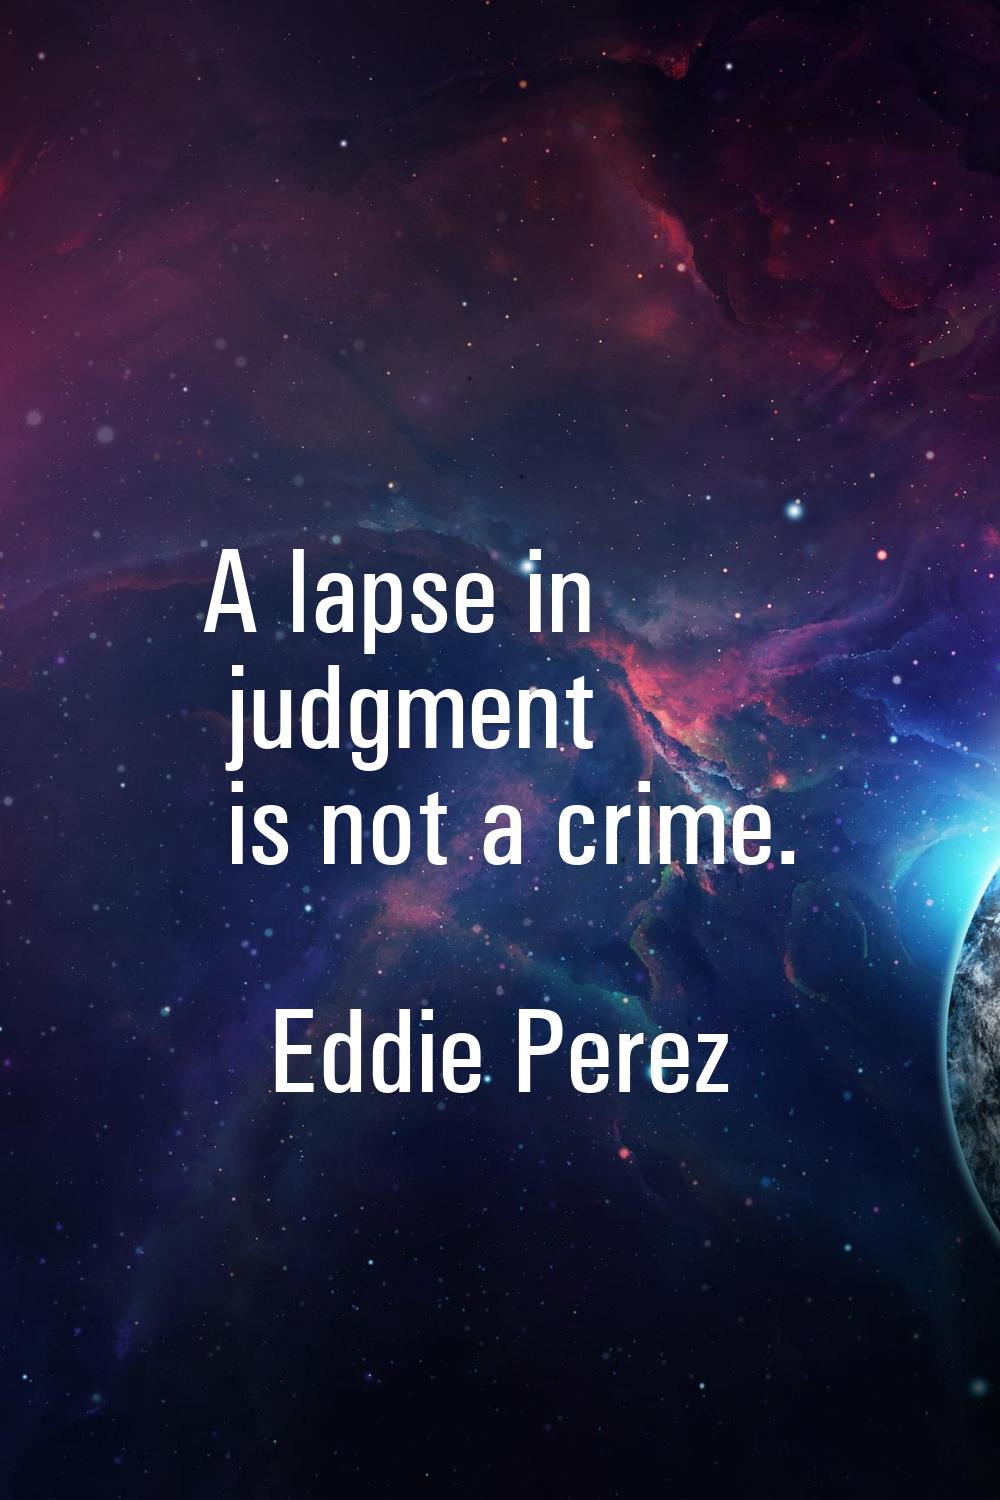 A lapse in judgment is not a crime.